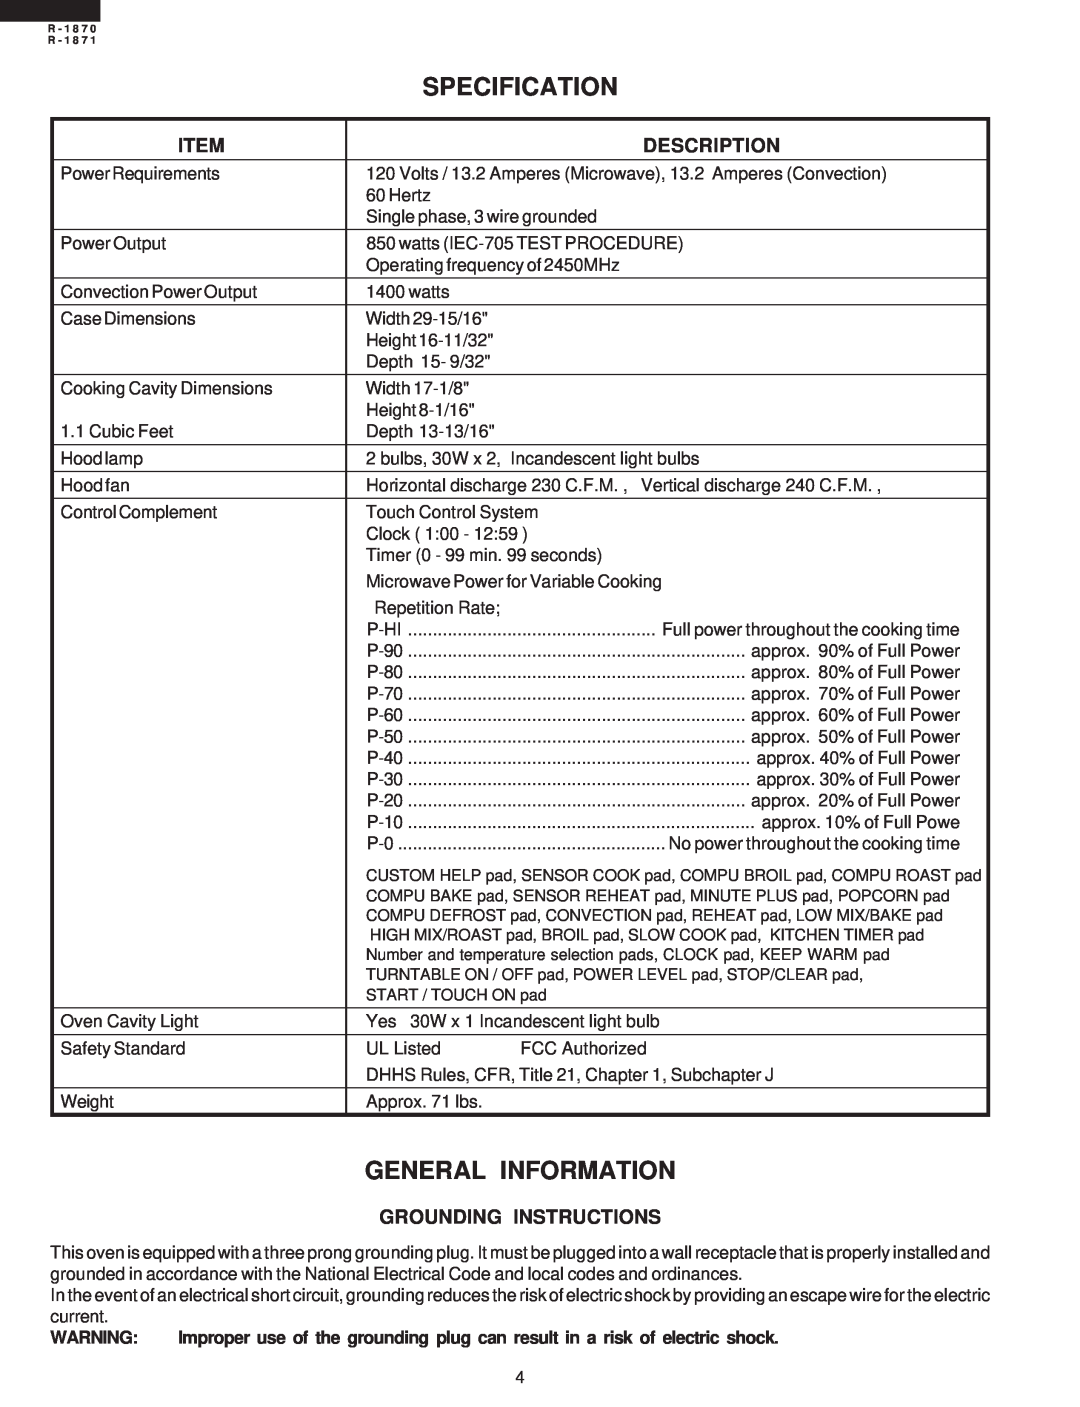 Sharp R-1870 service manual Specification, General Information, Description, Grounding Instructions, current 